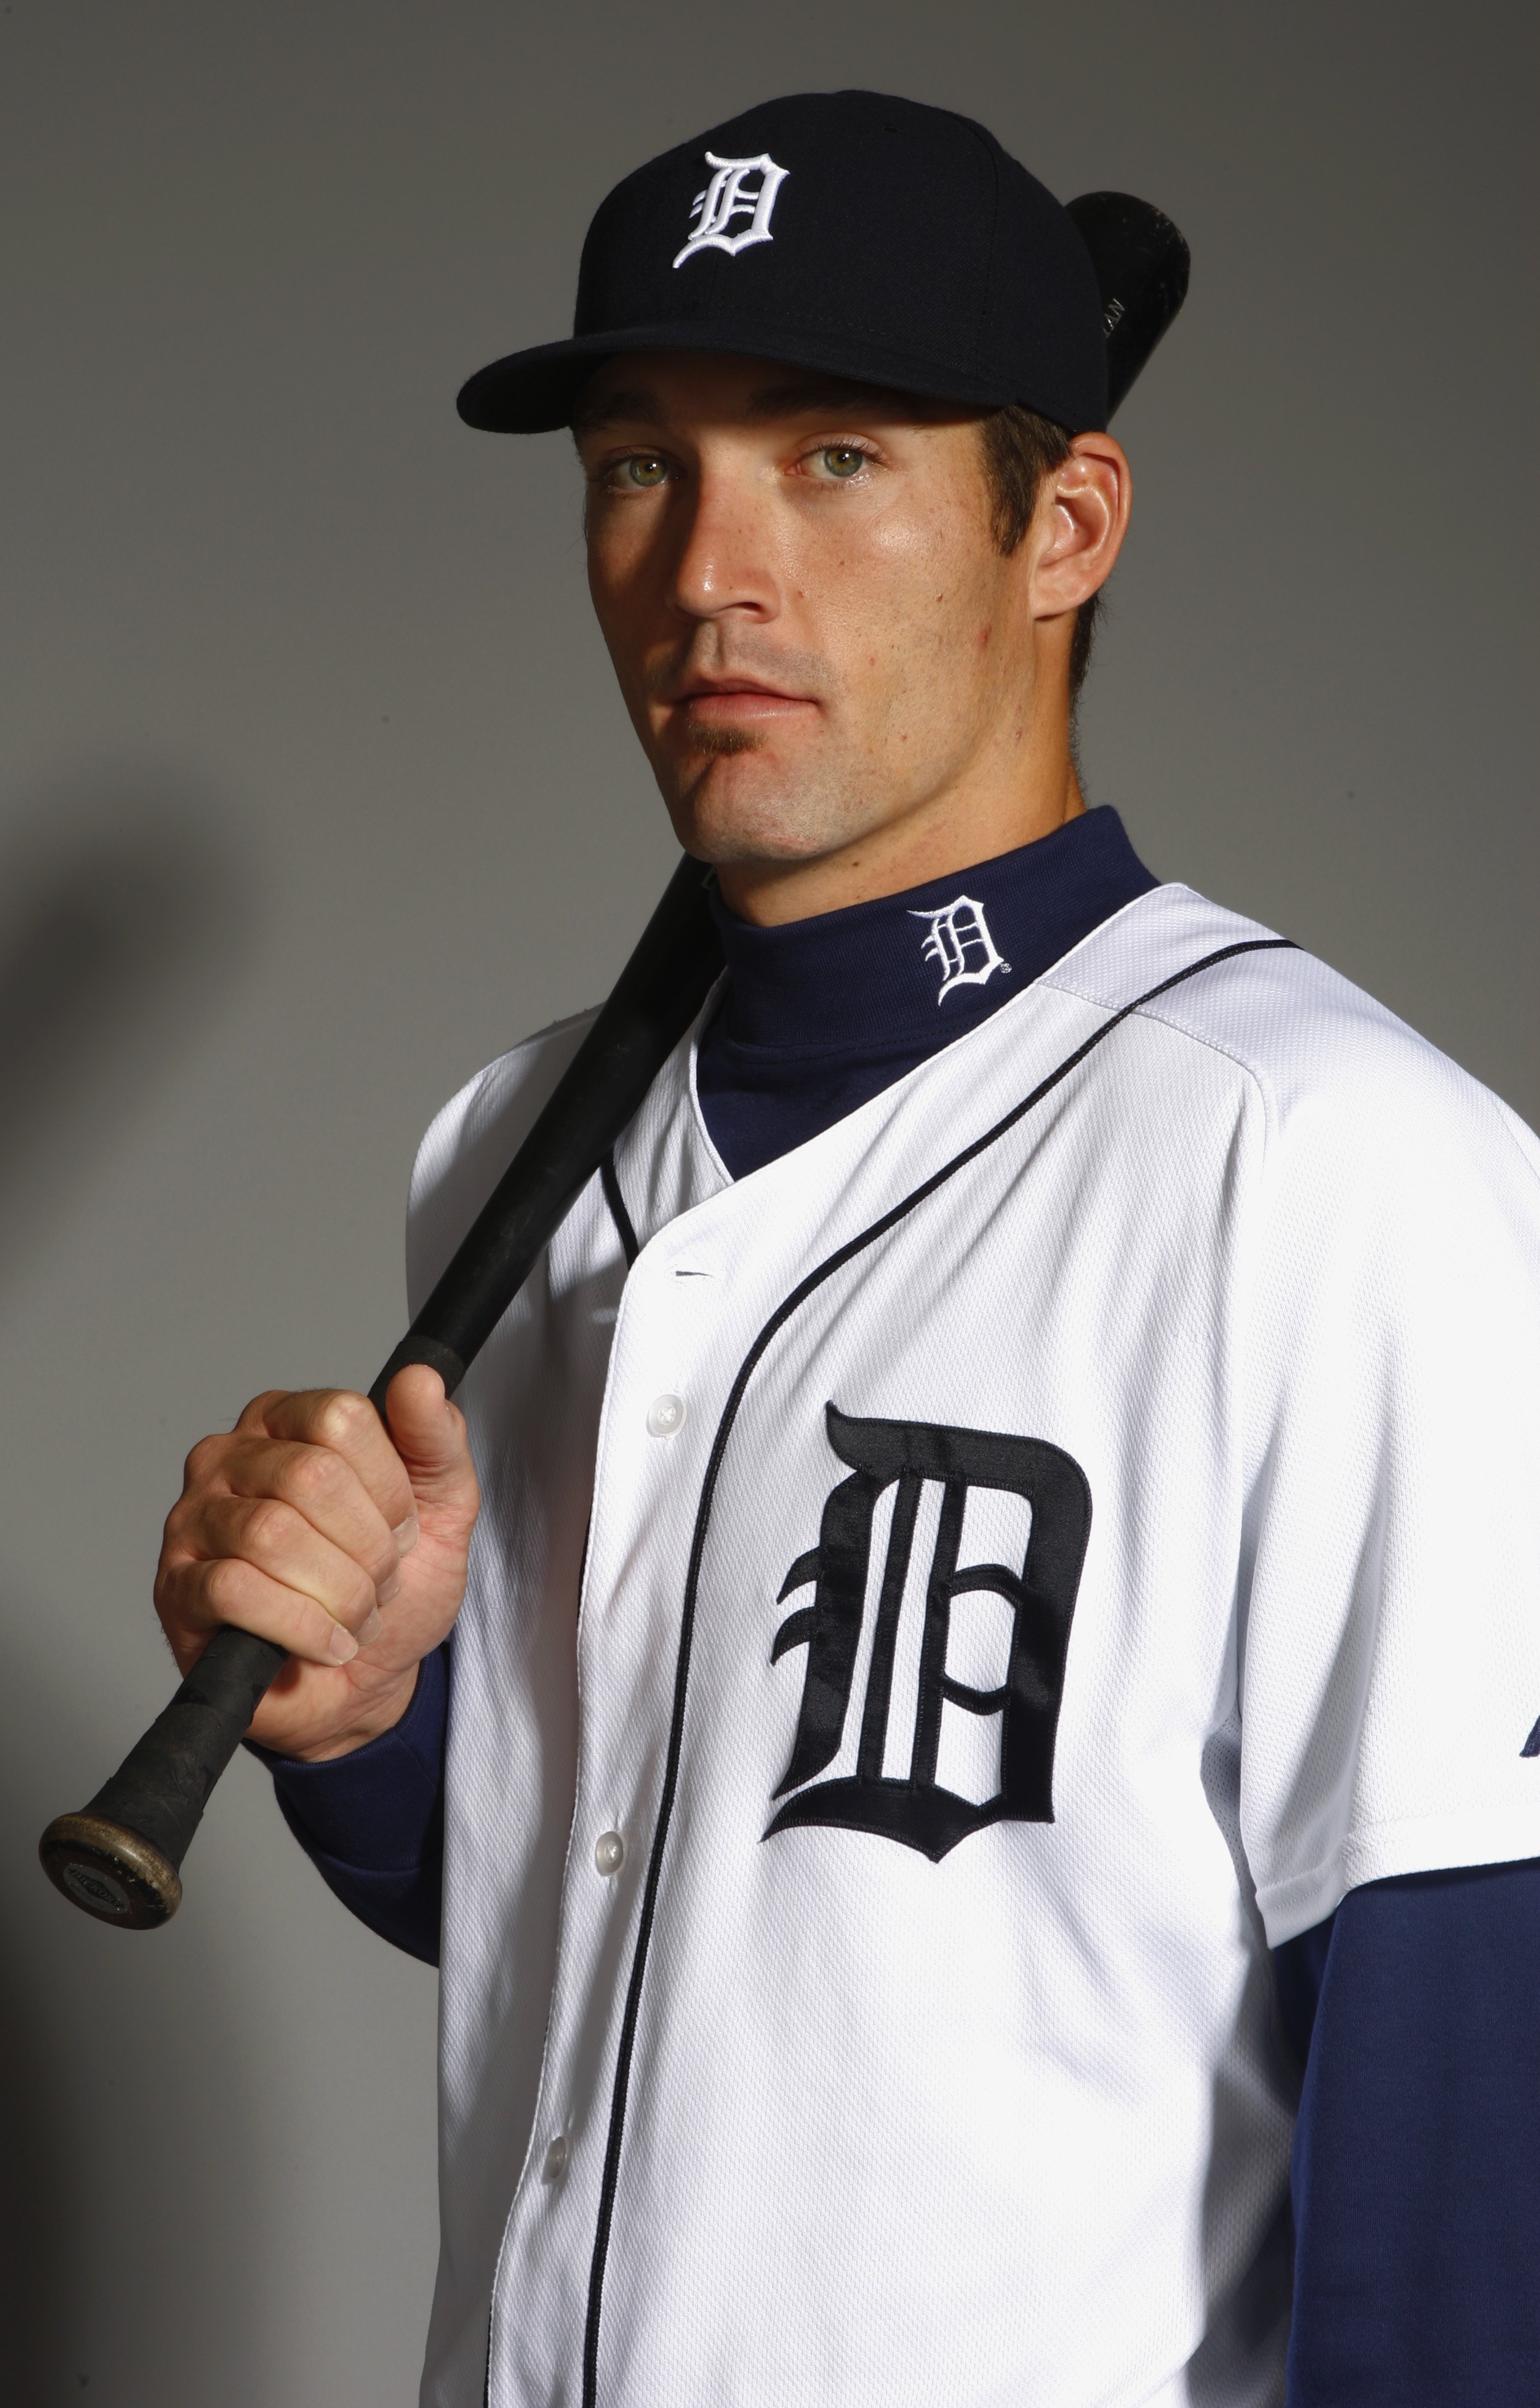 LAKELAND, FL - FEBRUARY 23:  Dusty Ryan of the Detroit Tigers poses for a portrait during Photo Day on February 23, 2008 at Joker Marchant Stadium in Lakeland, Florida. (Photo by: Nick Laham/Getty Images)